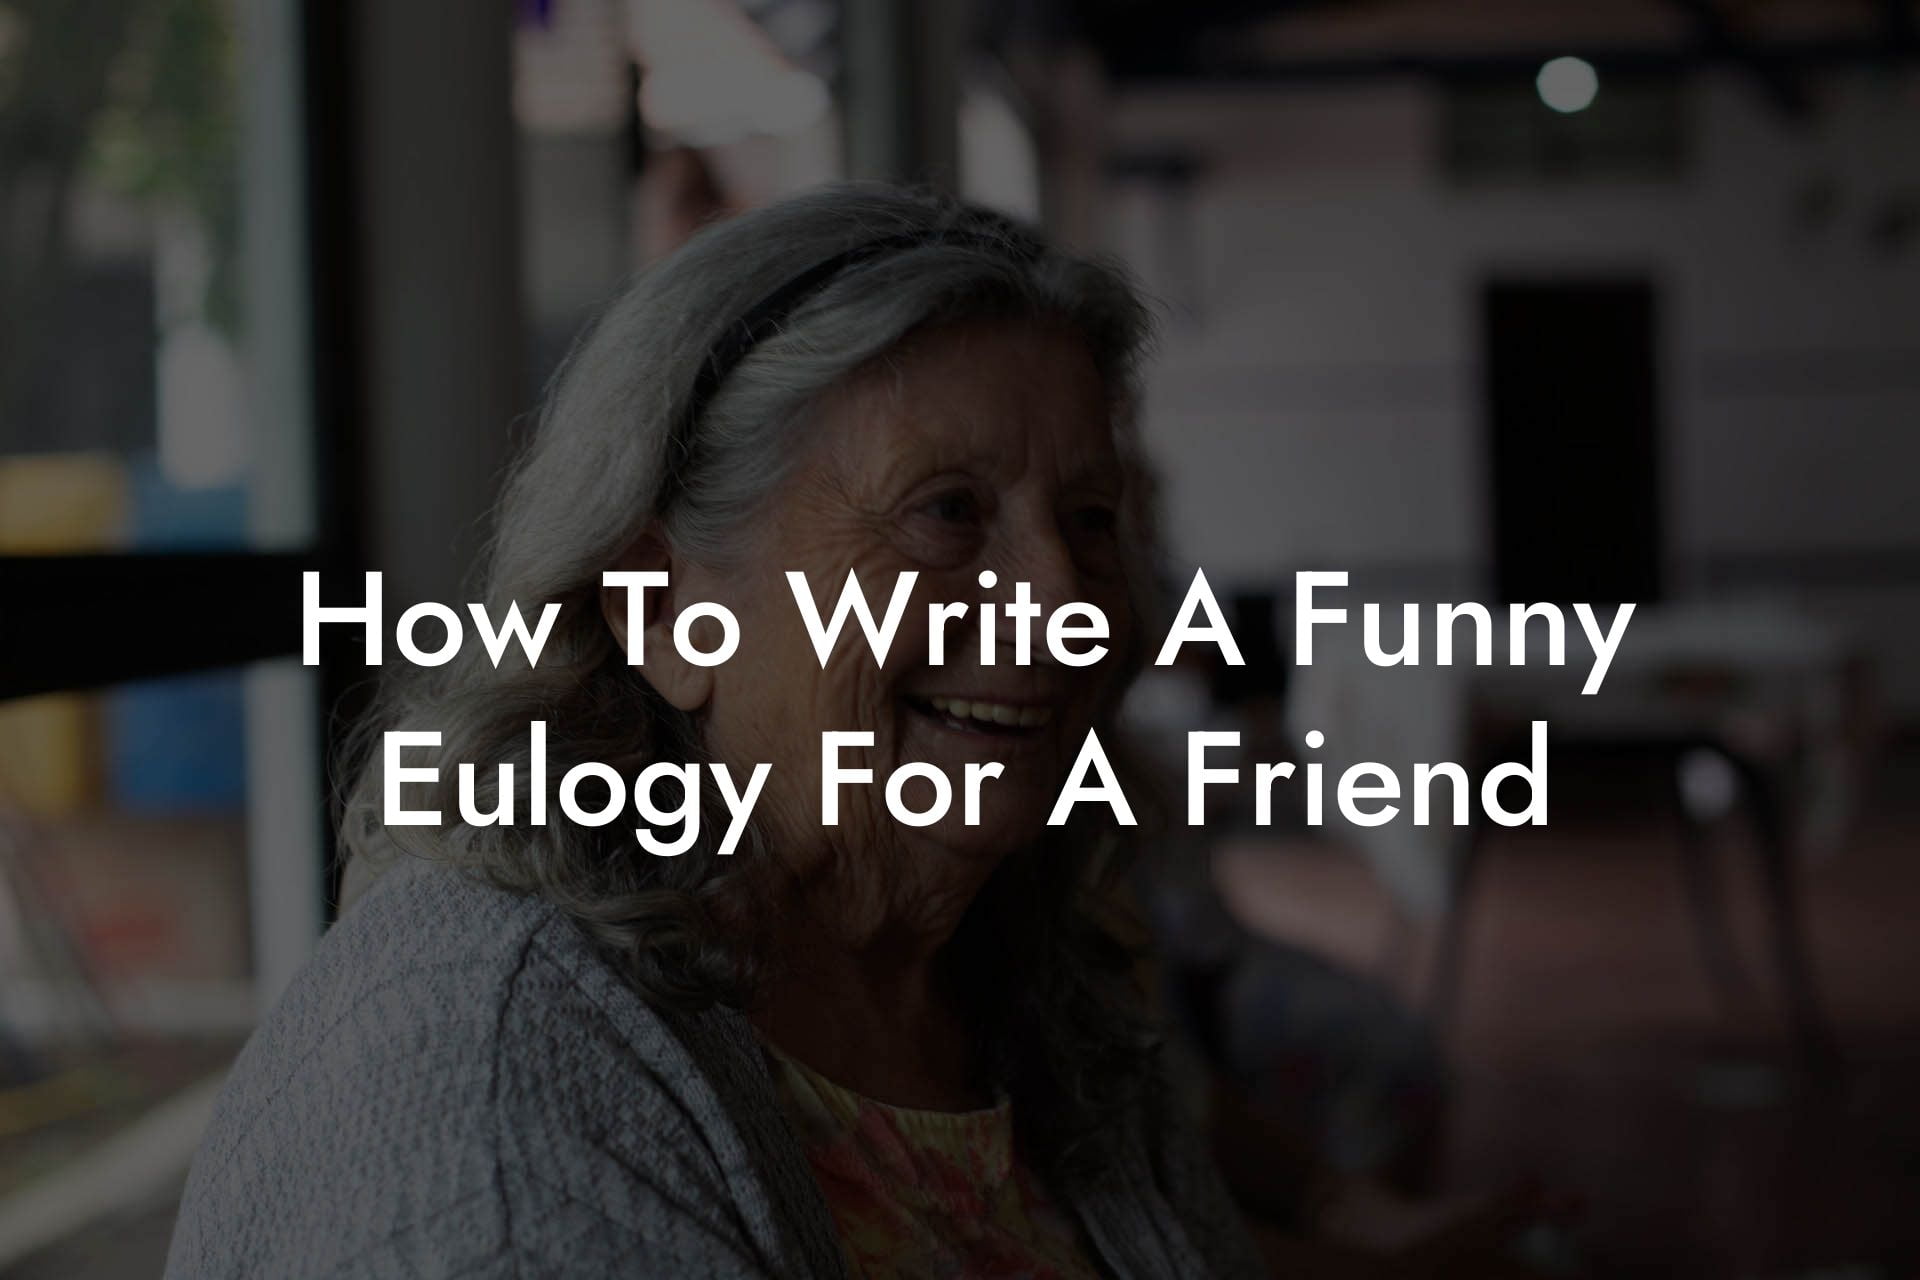 How To Write A Funny Eulogy For A Friend